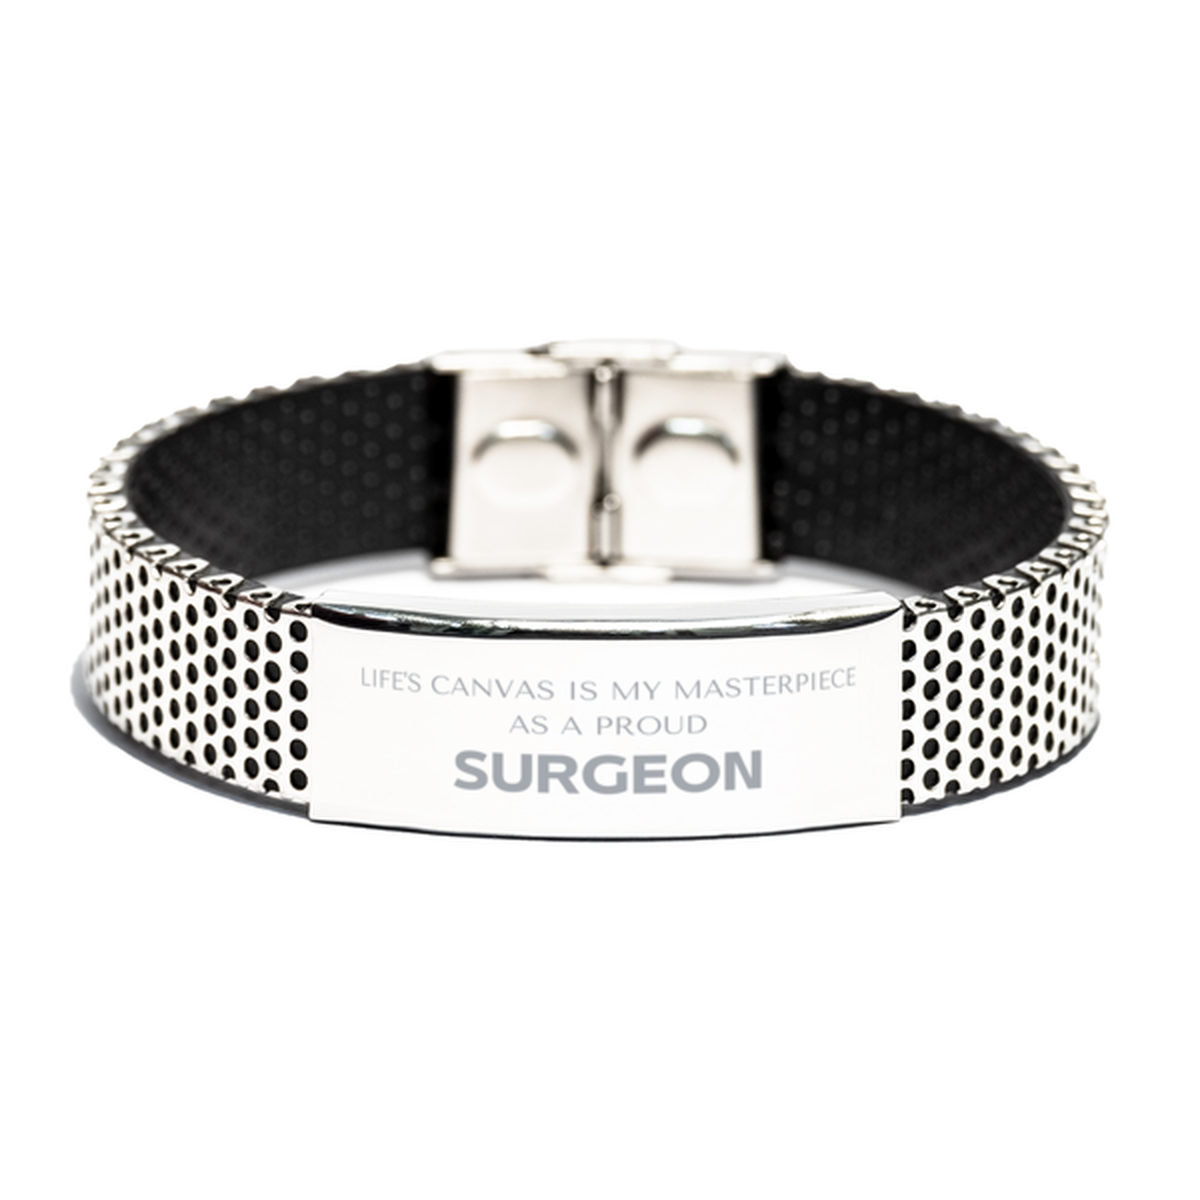 Proud Surgeon Gifts, Life's canvas is my masterpiece, Epic Birthday Christmas Unique Stainless Steel Bracelet For Surgeon, Coworkers, Men, Women, Friends